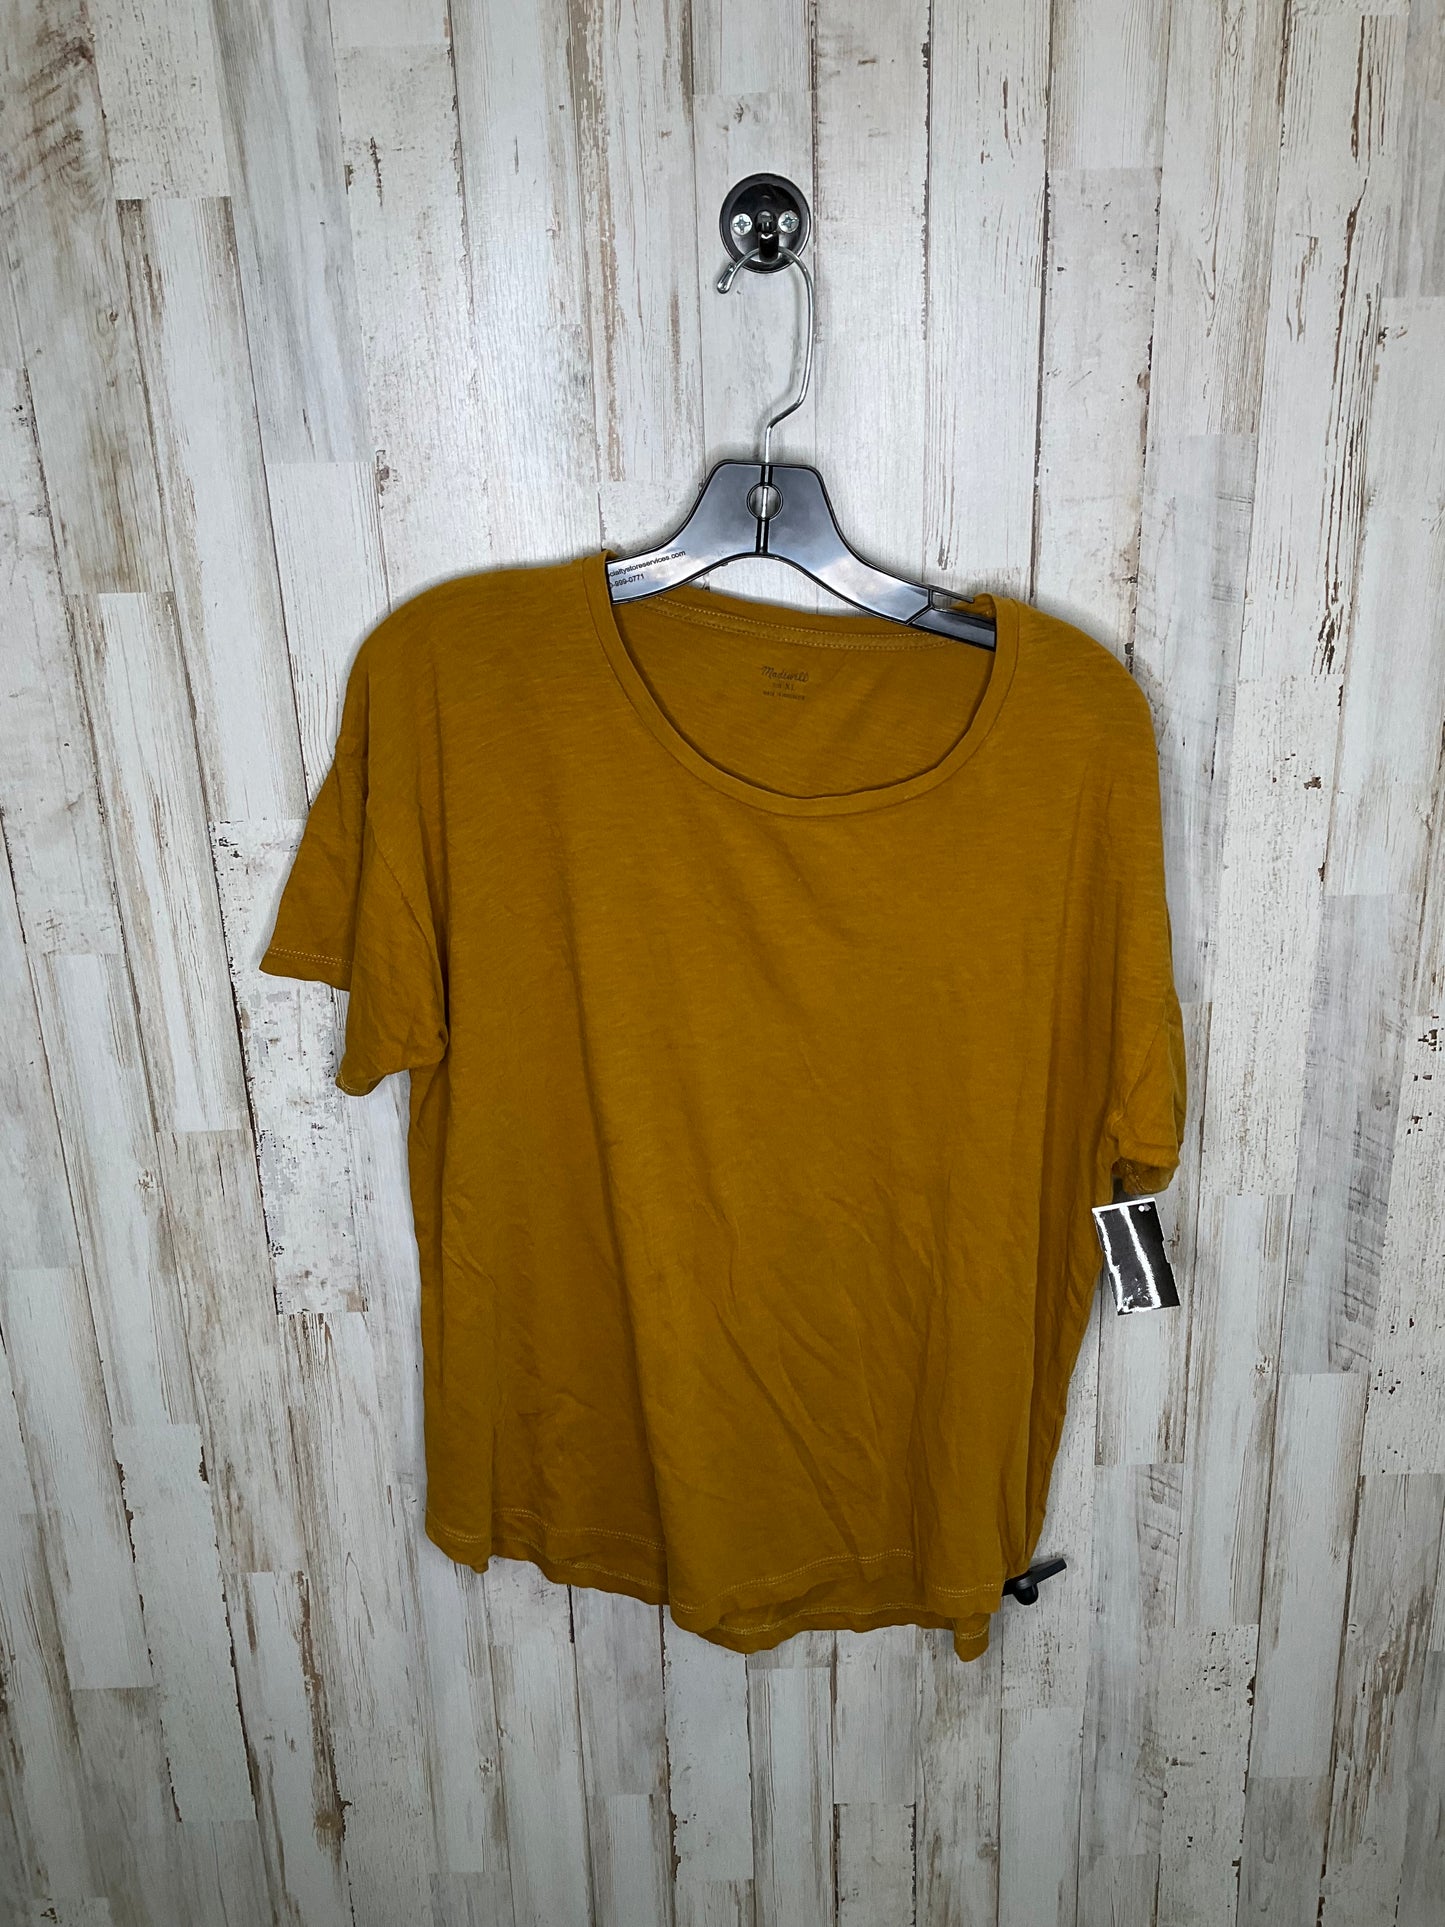 Yellow Top Short Sleeve Madewell, Size Xl